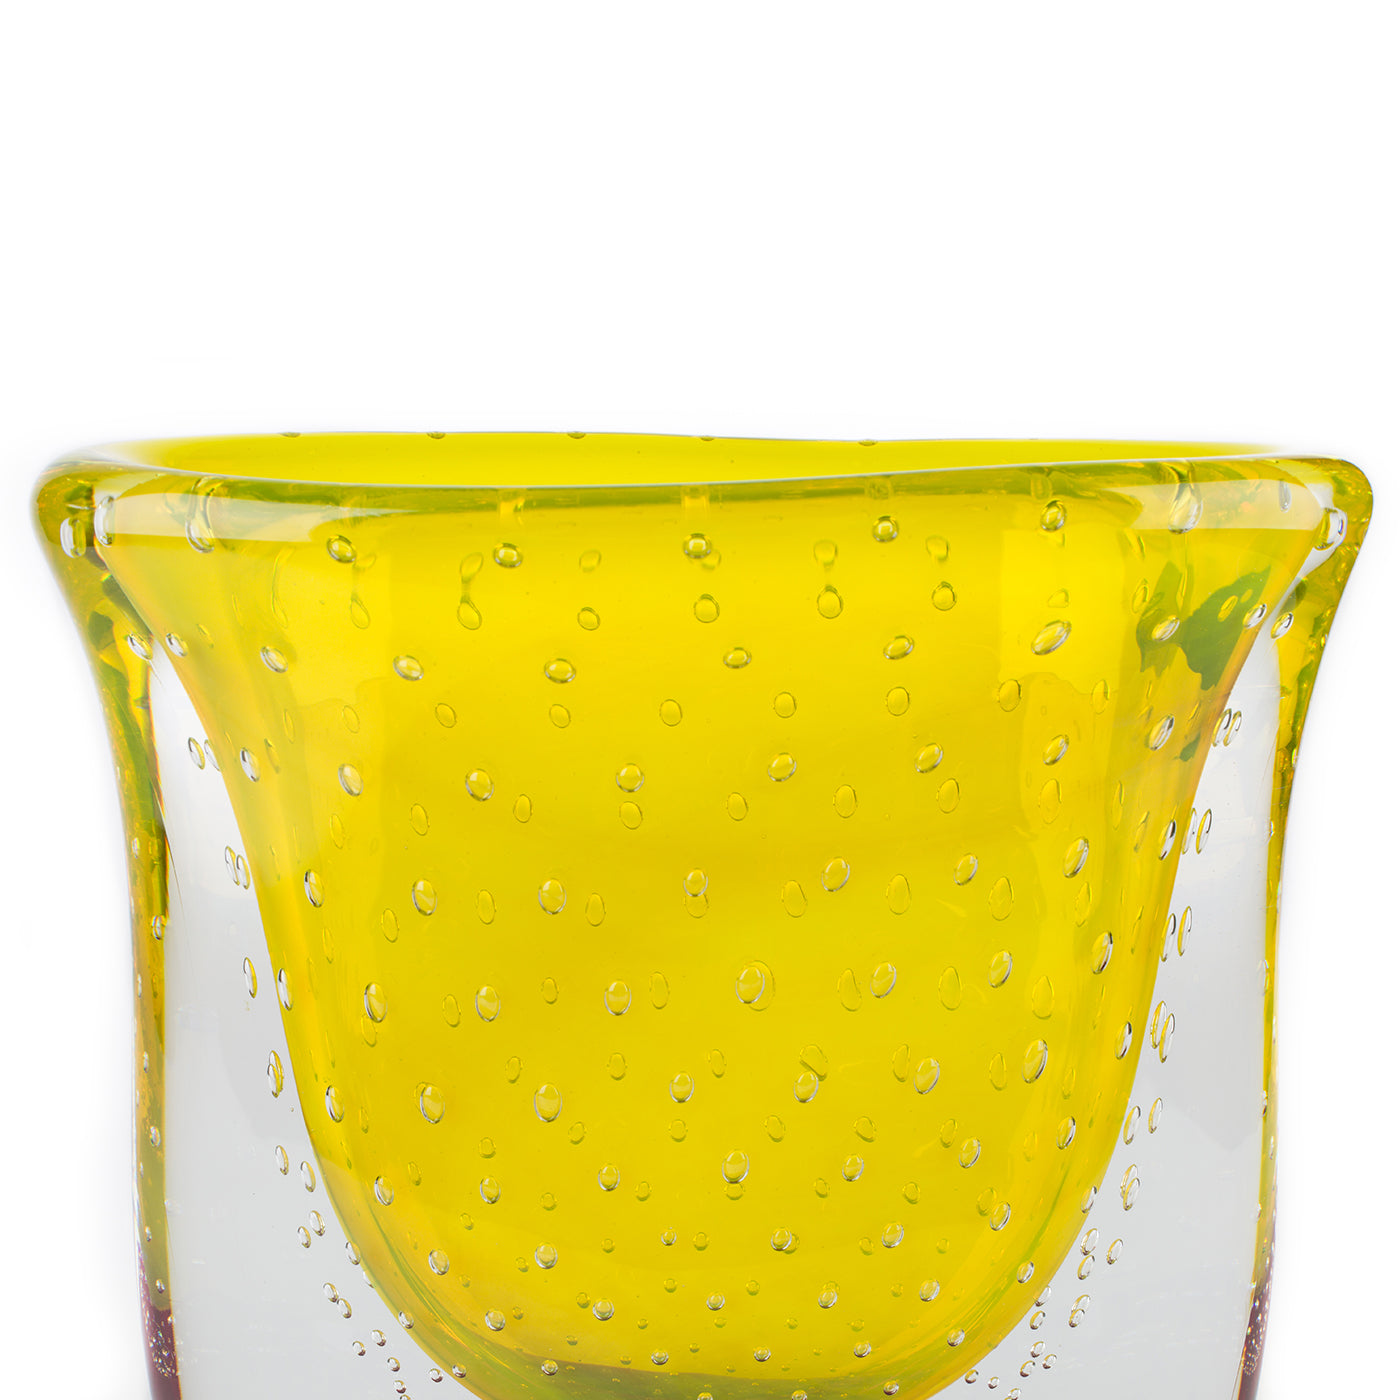 Vrmbicolr Yellow and Red Vase - Alternative view 1